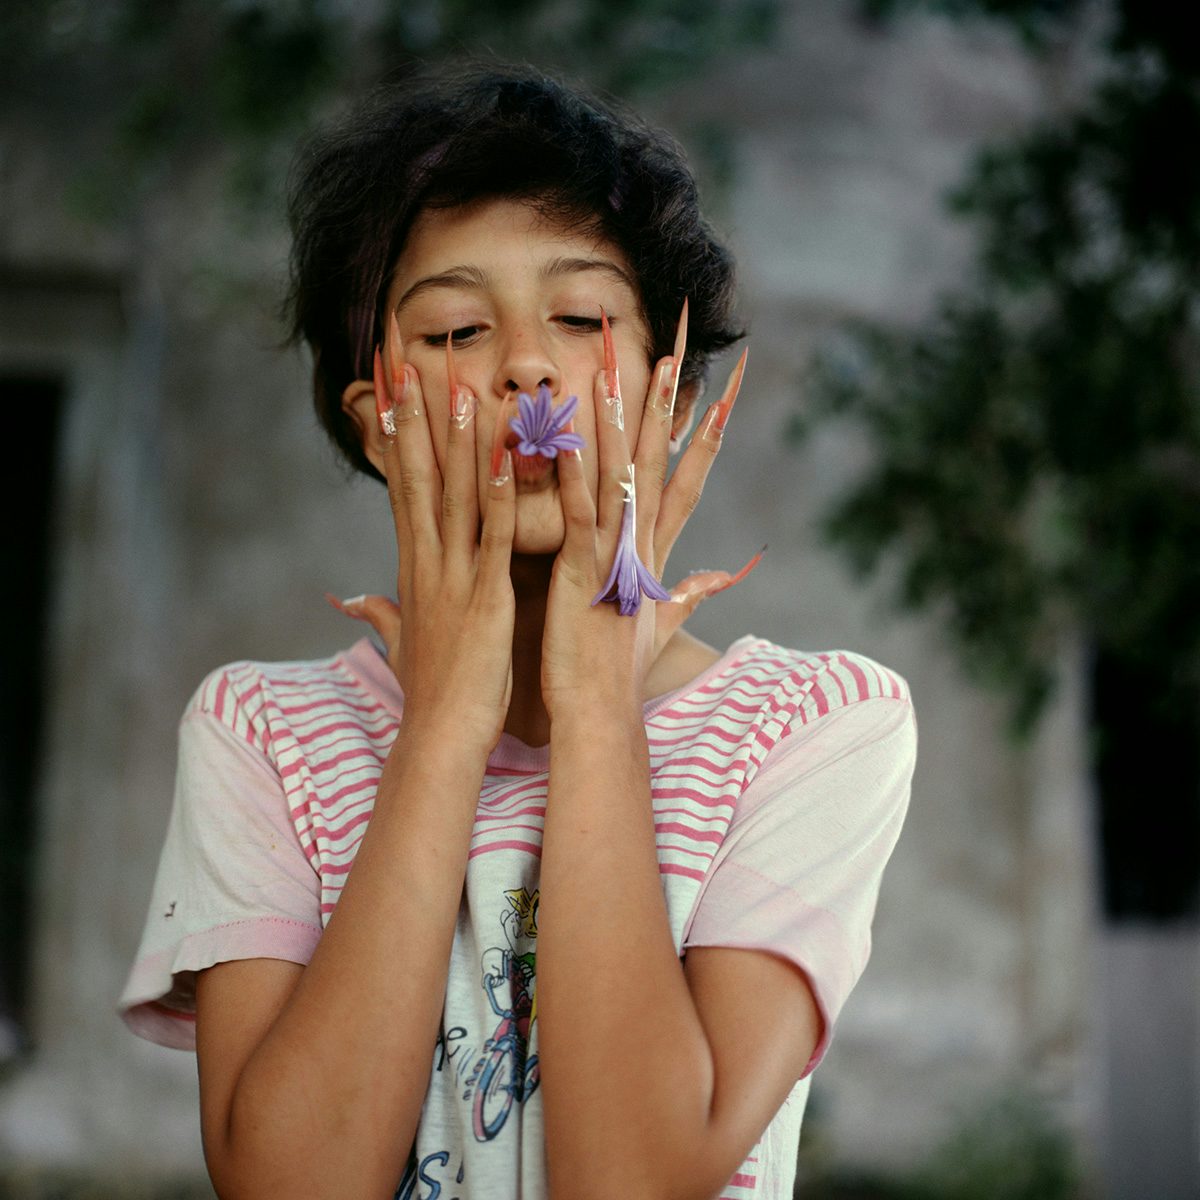 Photograph by Alessandra Sanguinetti of a person with dark cropped hair wearing a striped t-shirt and very long pointed nails, holding a purple petal to their lips